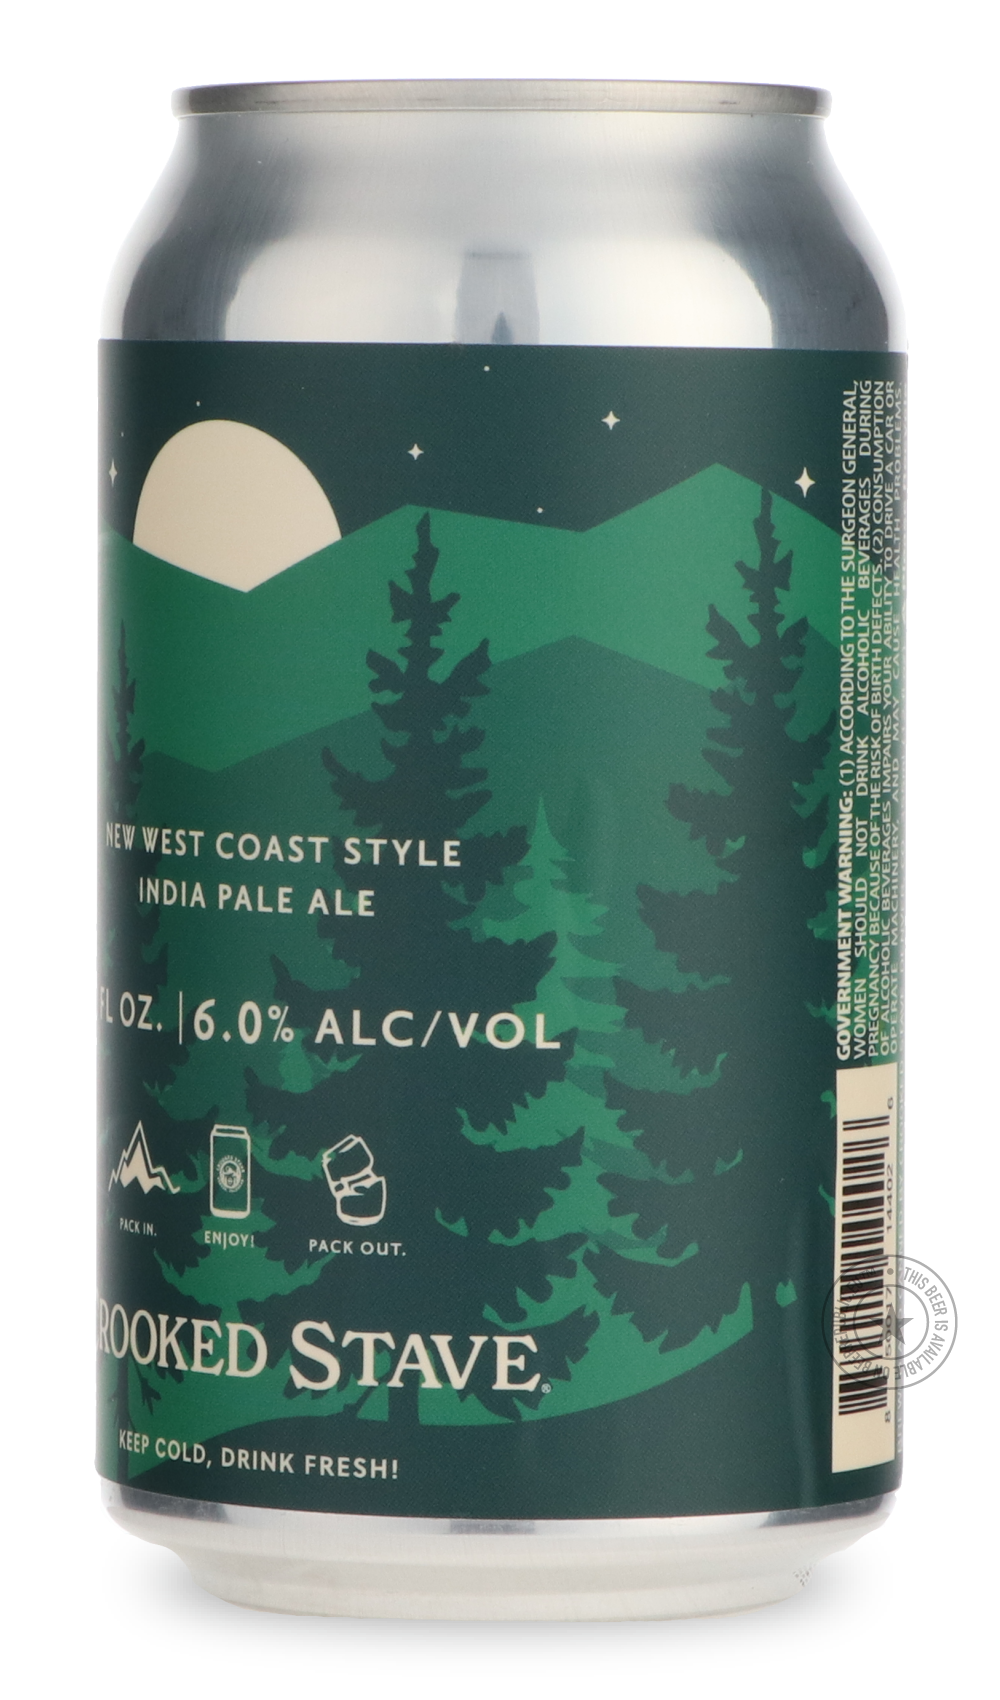 -Crooked Stave- Juicy West-IPA- Only @ Beer Republic - The best online beer store for American & Canadian craft beer - Buy beer online from the USA and Canada - Bier online kopen - Amerikaans bier kopen - Craft beer store - Craft beer kopen - Amerikanisch bier kaufen - Bier online kaufen - Acheter biere online - IPA - Stout - Porter - New England IPA - Hazy IPA - Imperial Stout - Barrel Aged - Barrel Aged Imperial Stout - Brown - Dark beer - Blond - Blonde - Pilsner - Lager - Wheat - Weizen - Amber - Barley